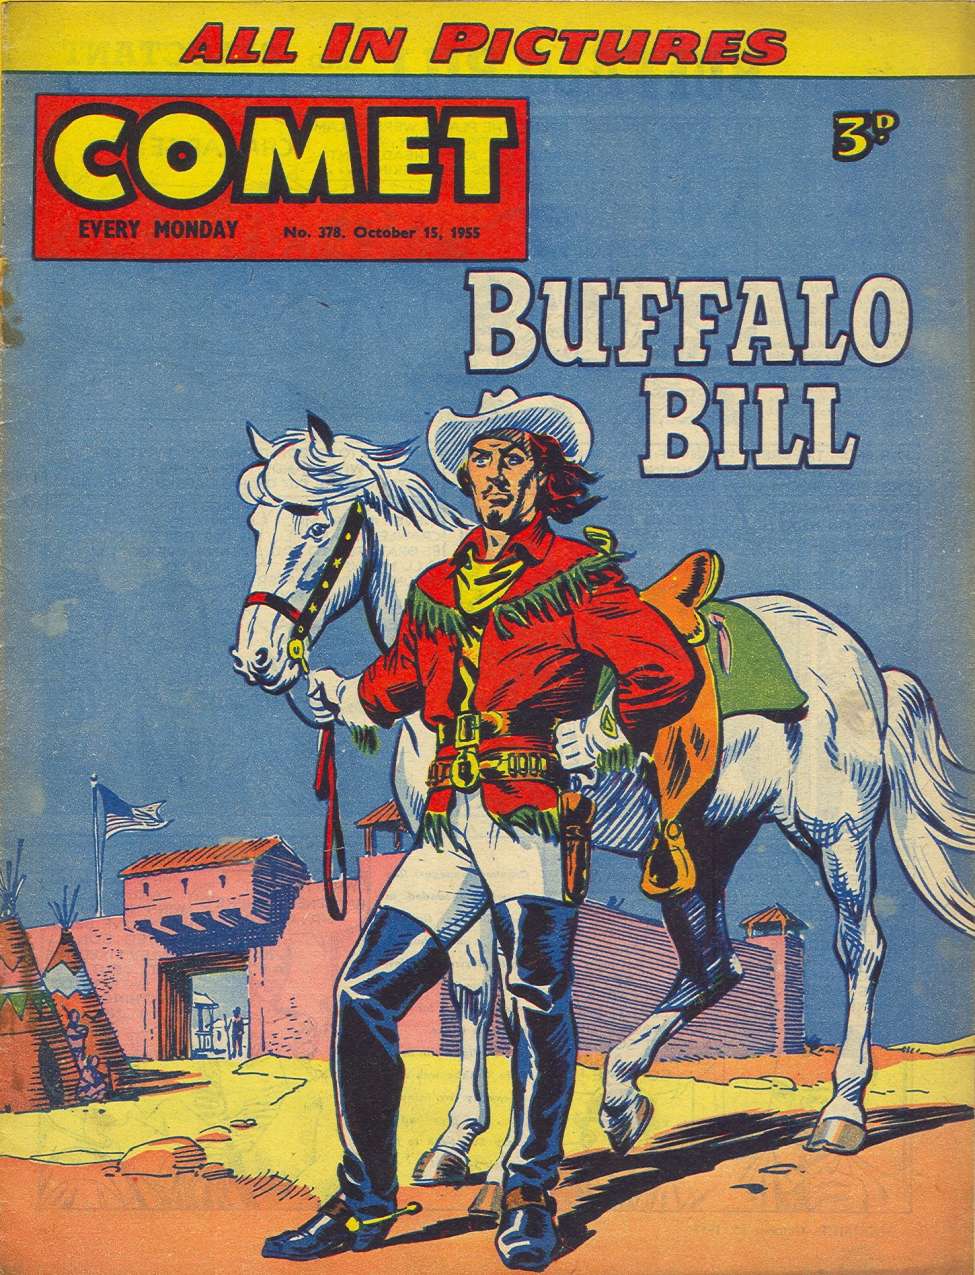 Comic Book Cover For The Comet 378